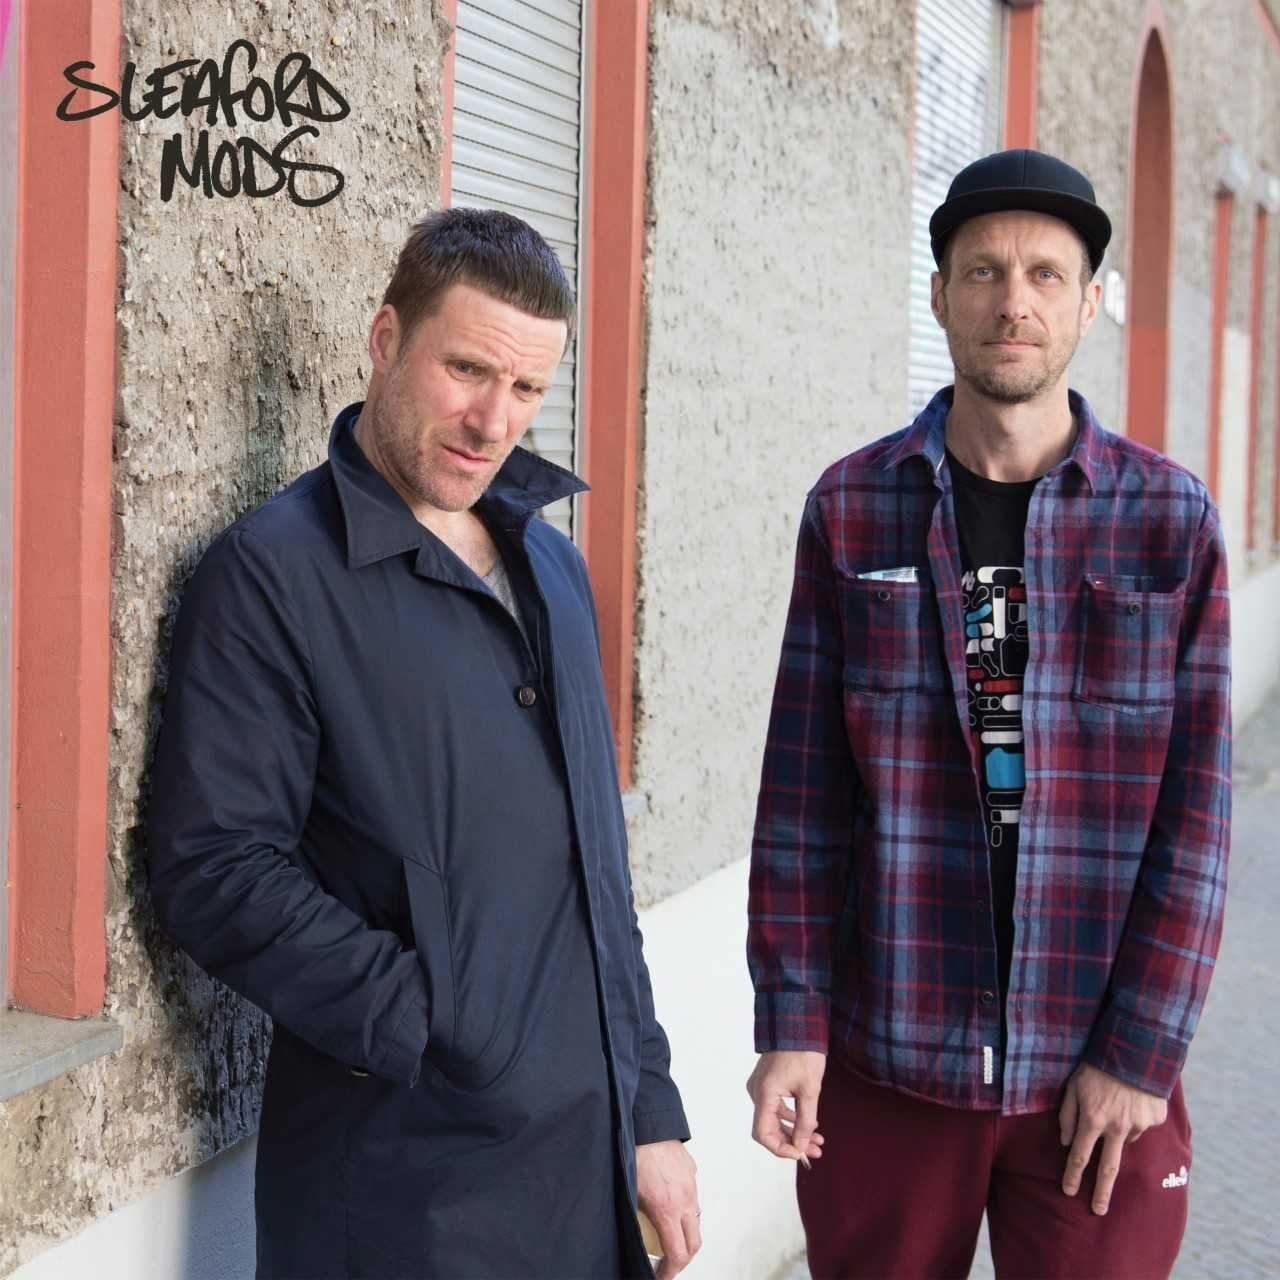 Nasty, Brutish, and Danceable: The New Sleaford Mods EP